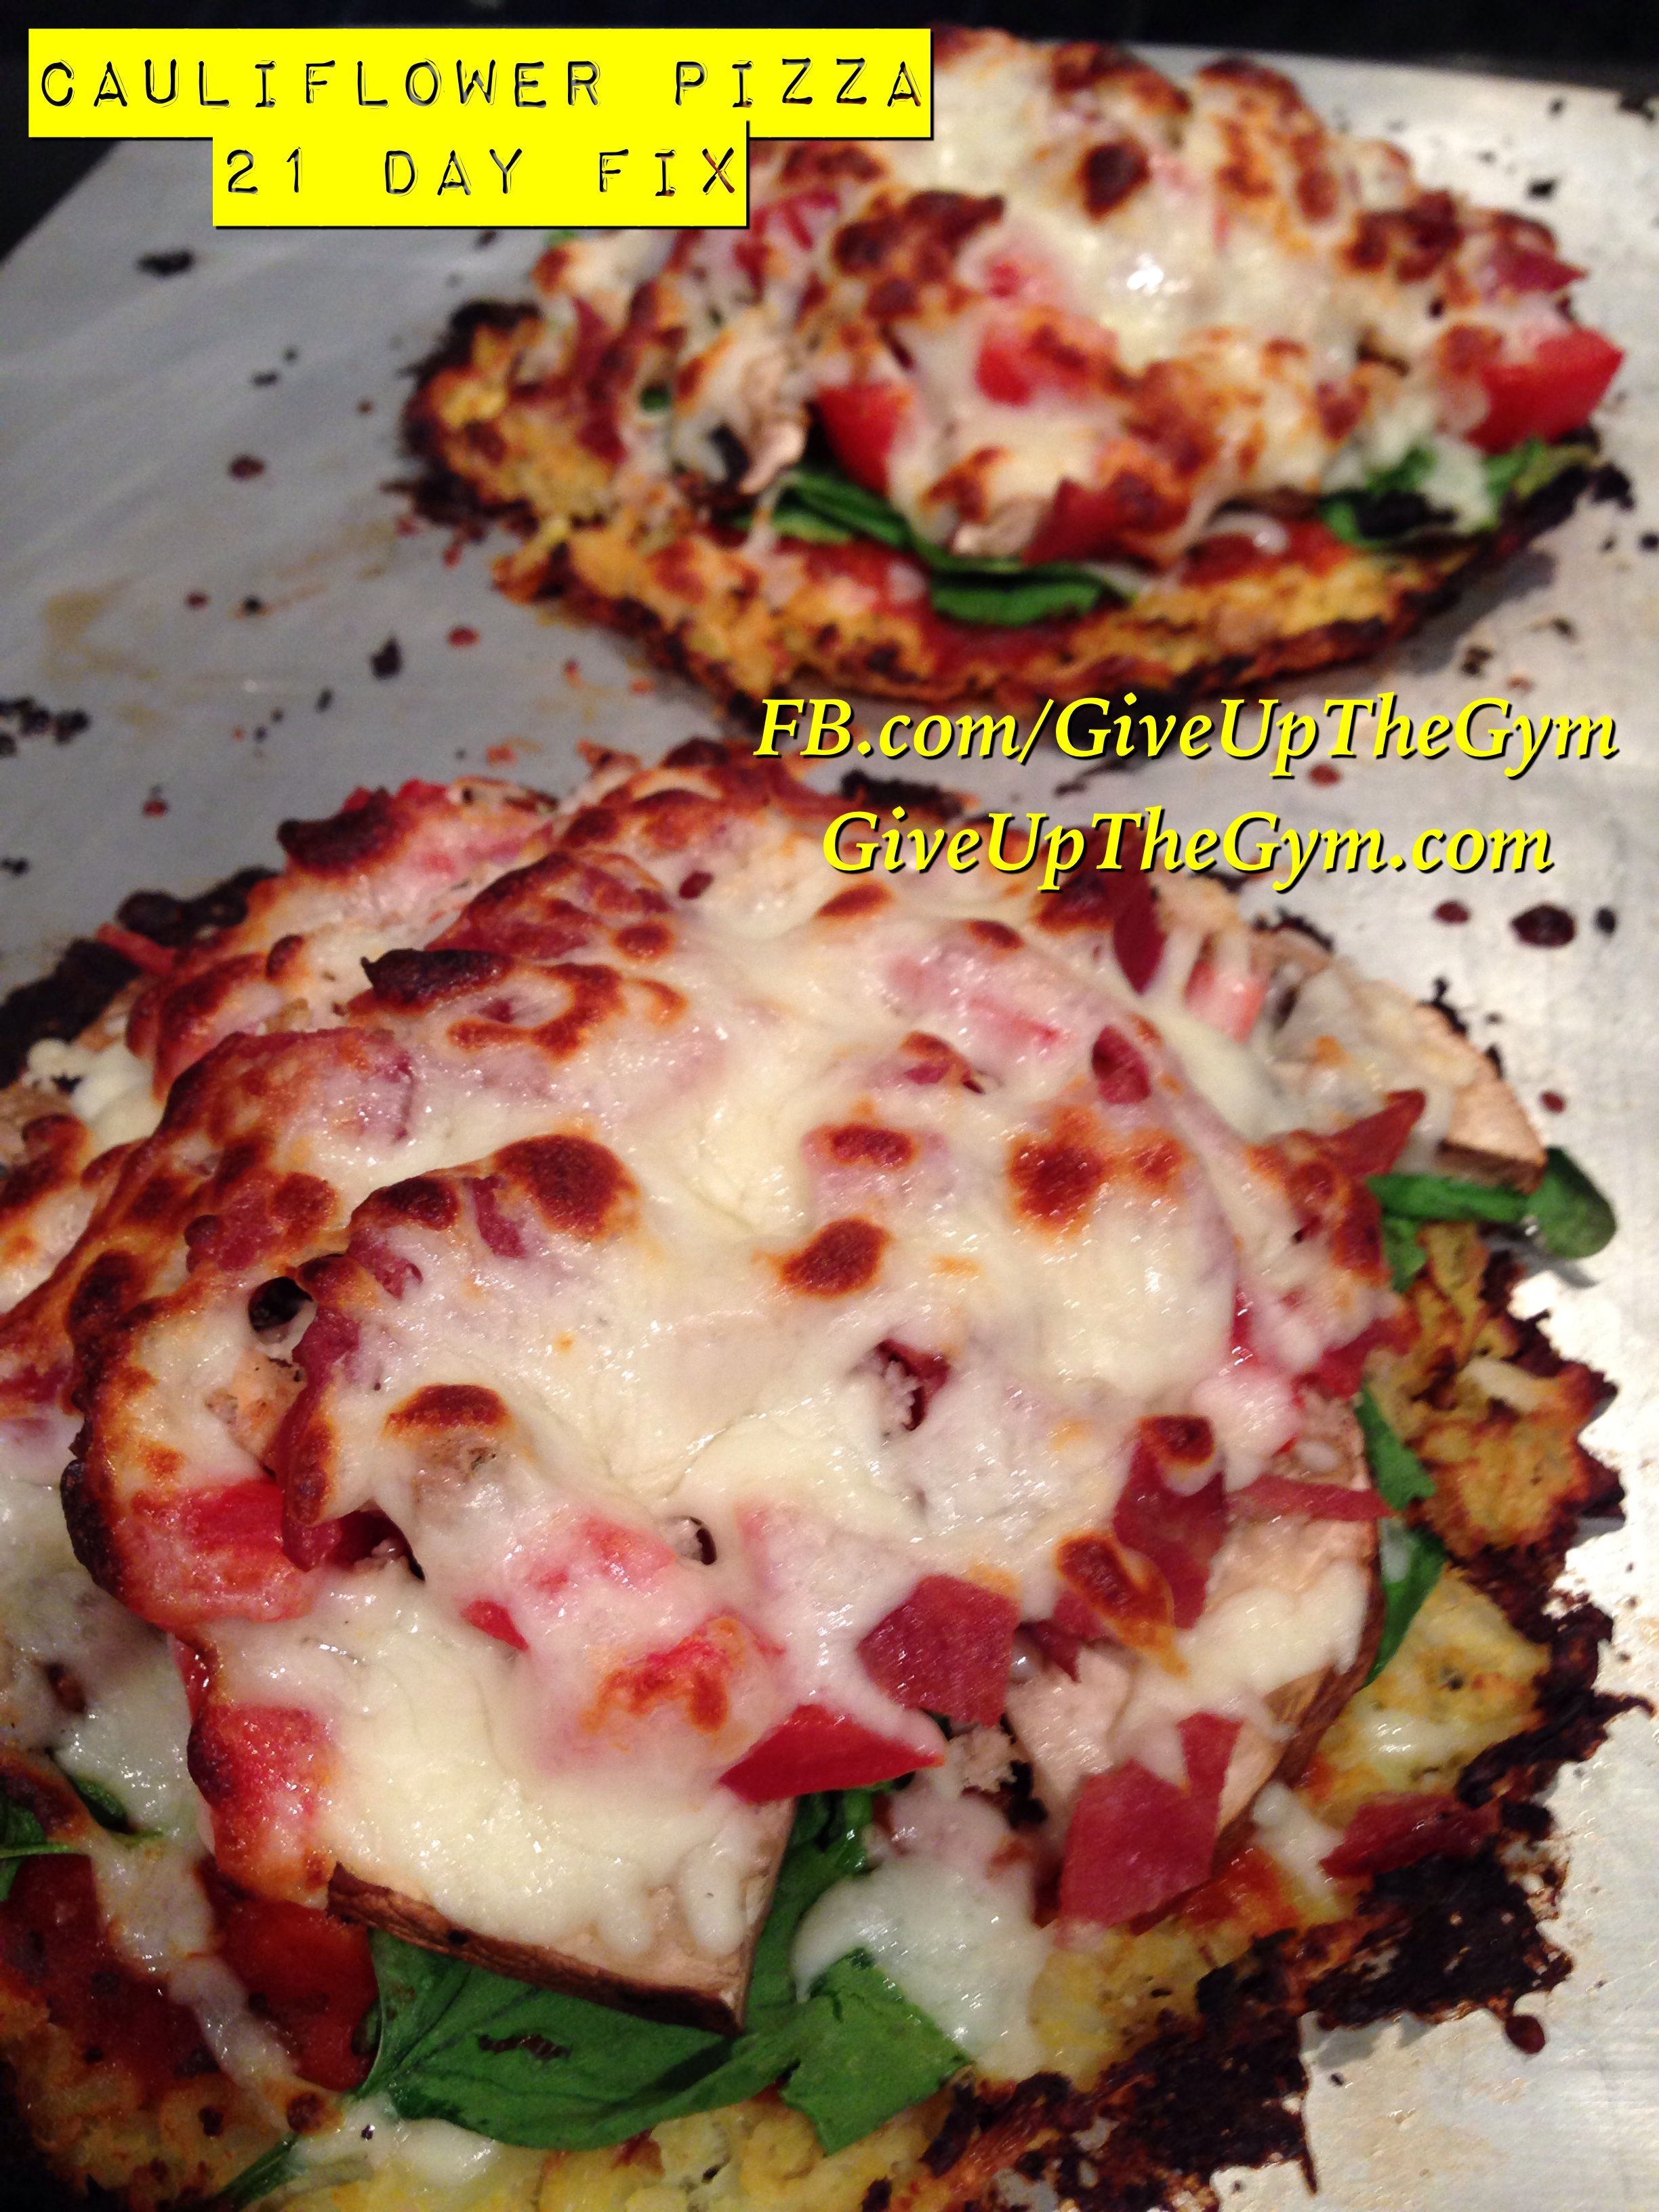 21 Day Fix Recipes – Cauliflower Pizza. Get started now!